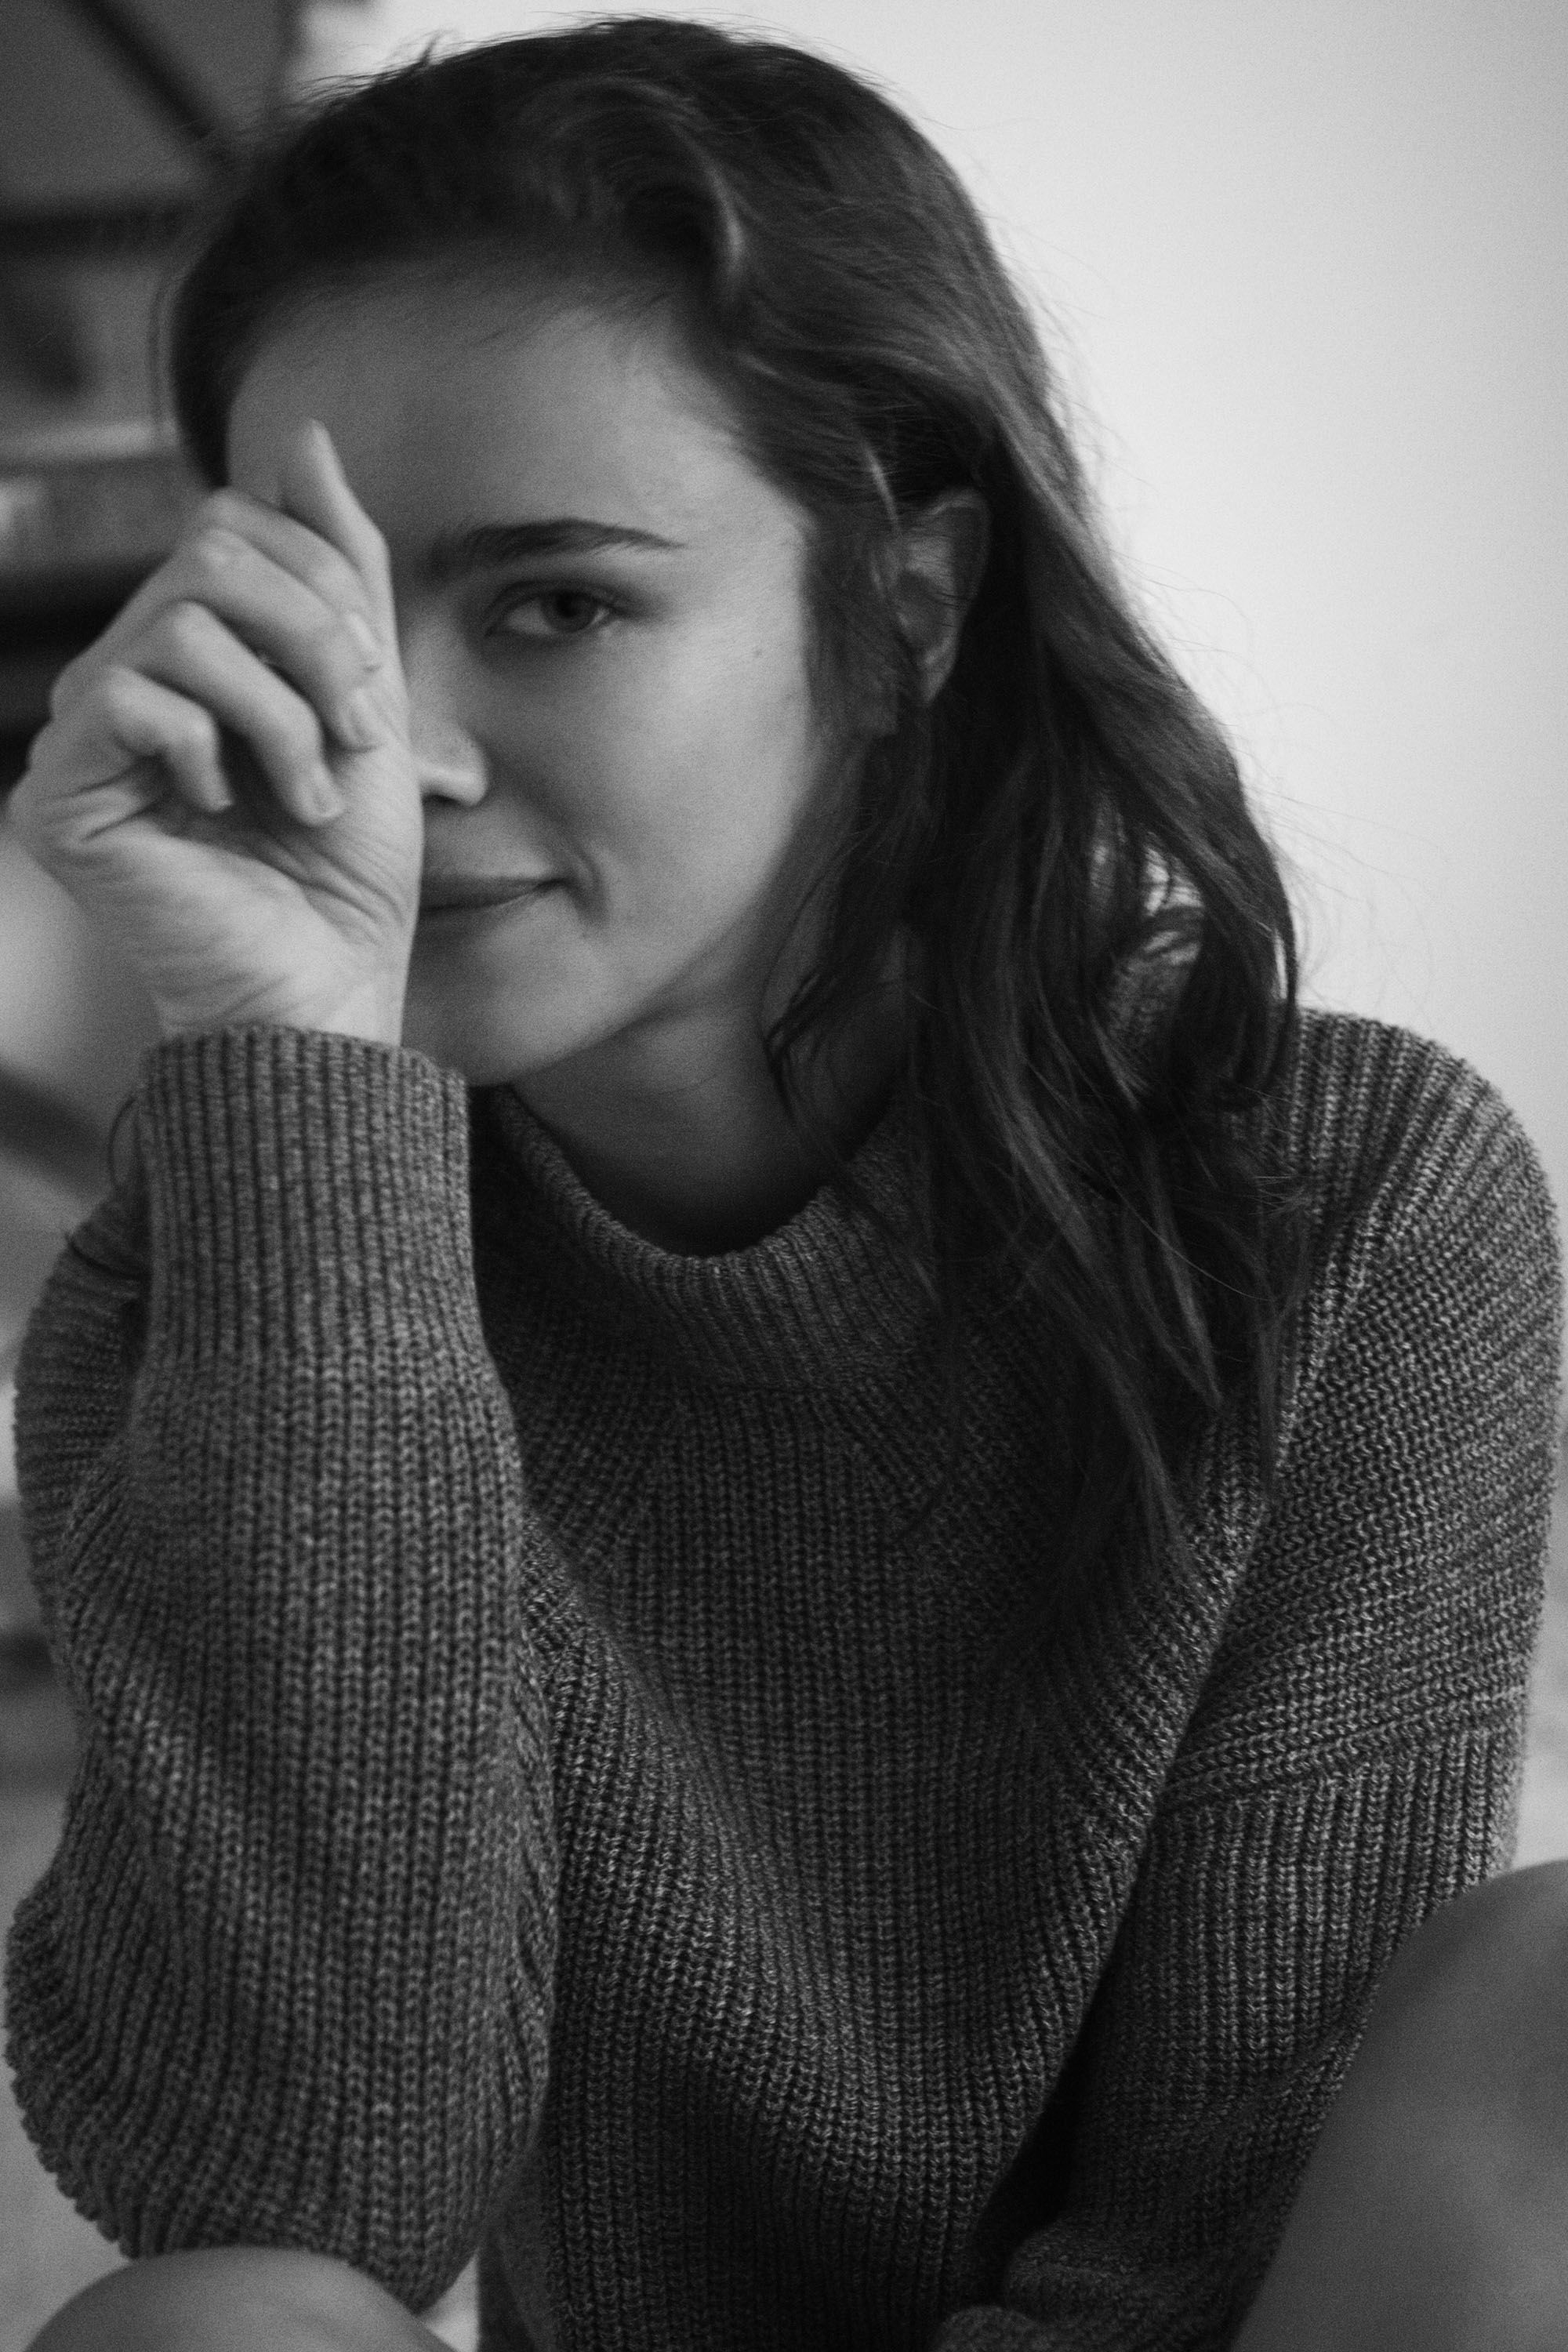 Watch This Face: Jena Goldsack